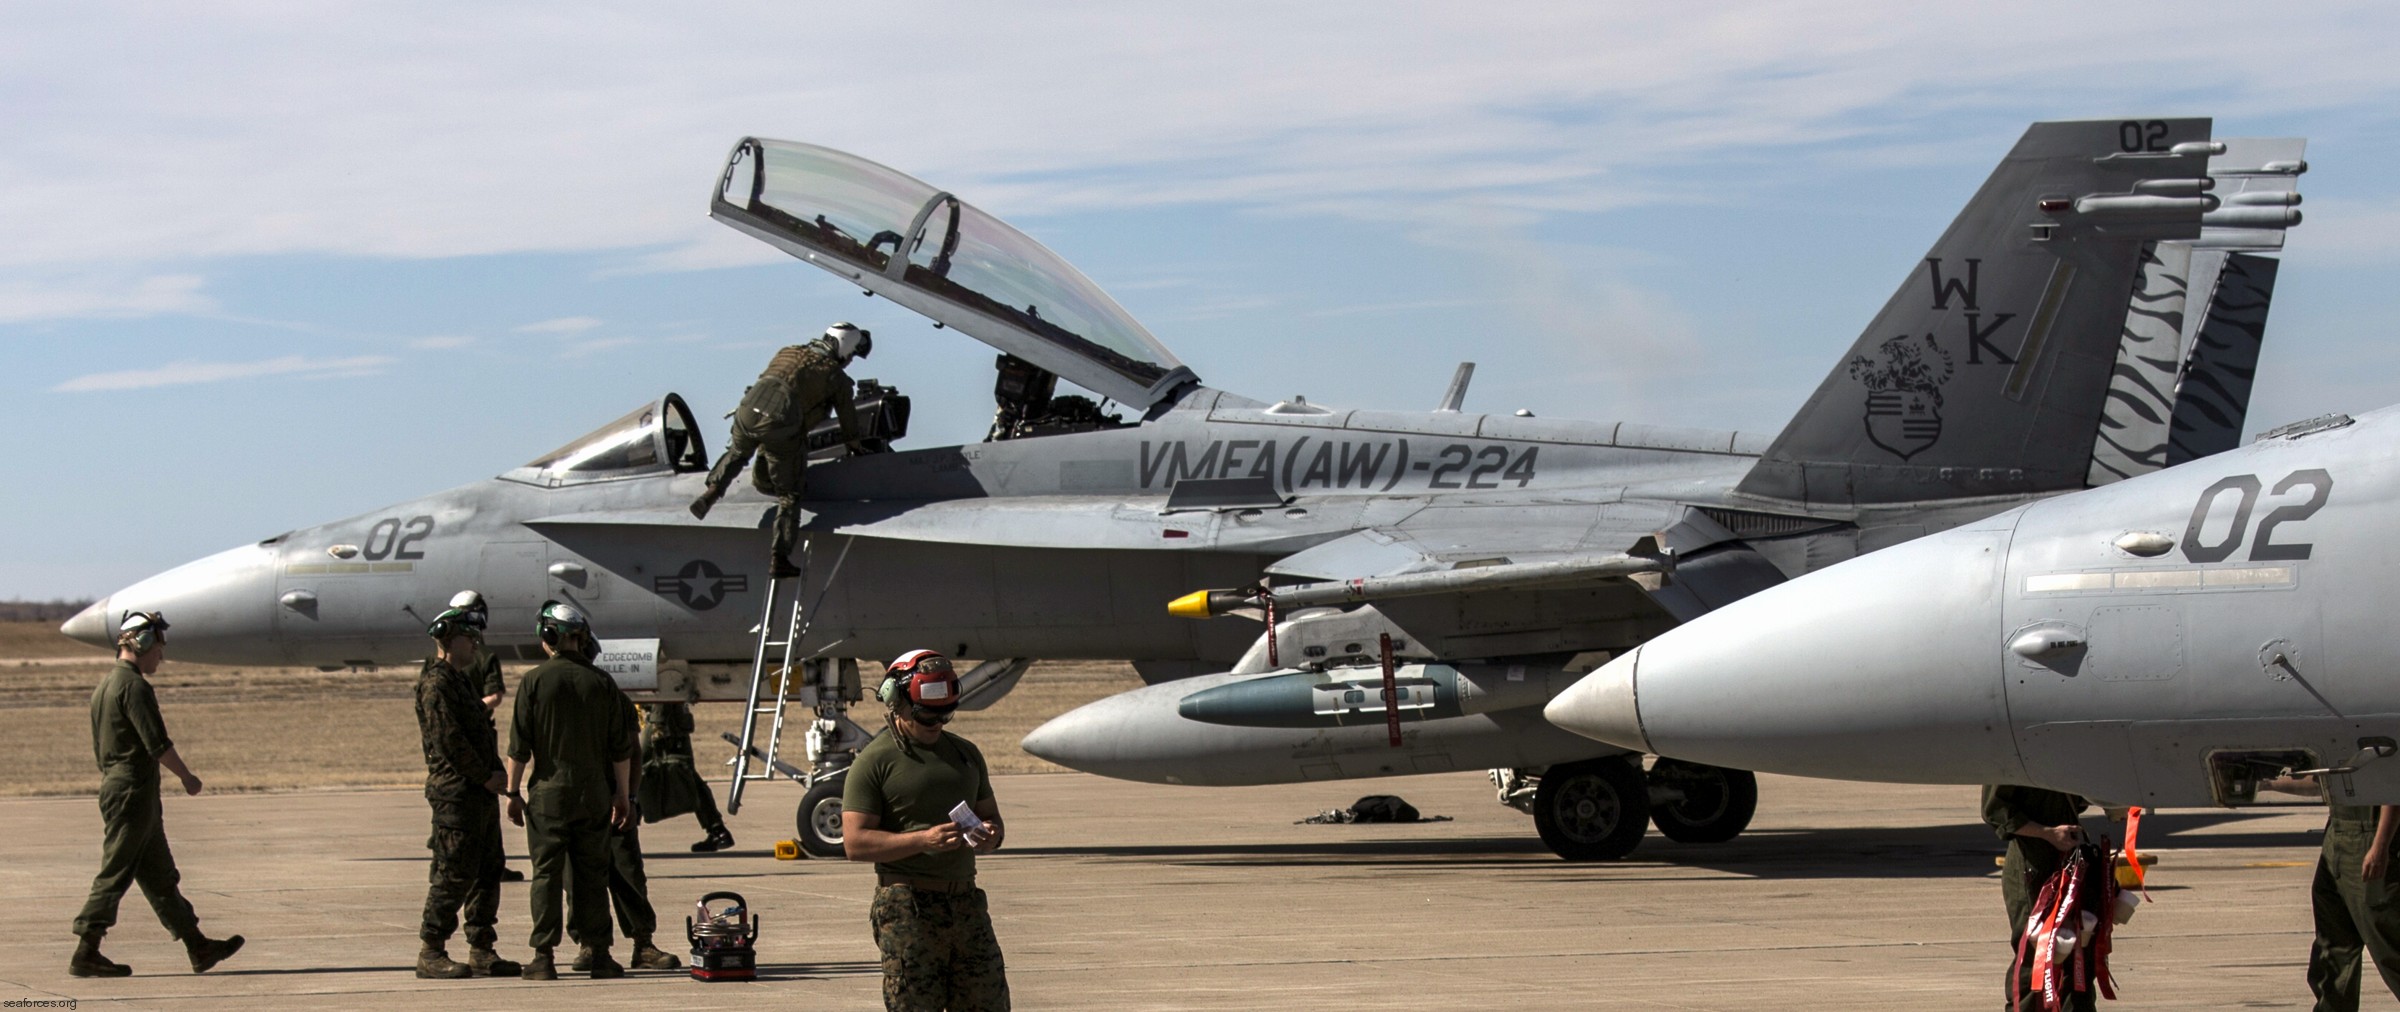 vmfa(aw)-224 bengals marine fighter attack squadron usmc f/a-18d hornet 49